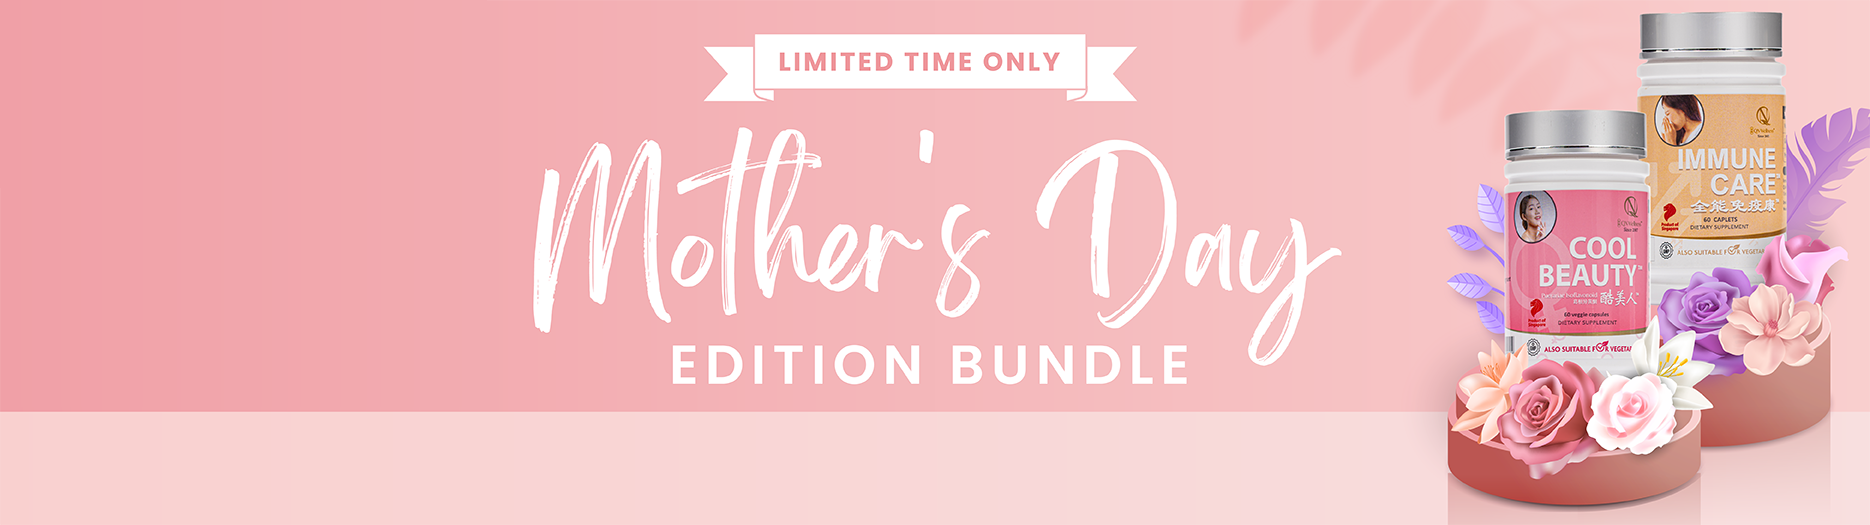 Mother&#39;s Day Edition Bundle 1870 x 525-02